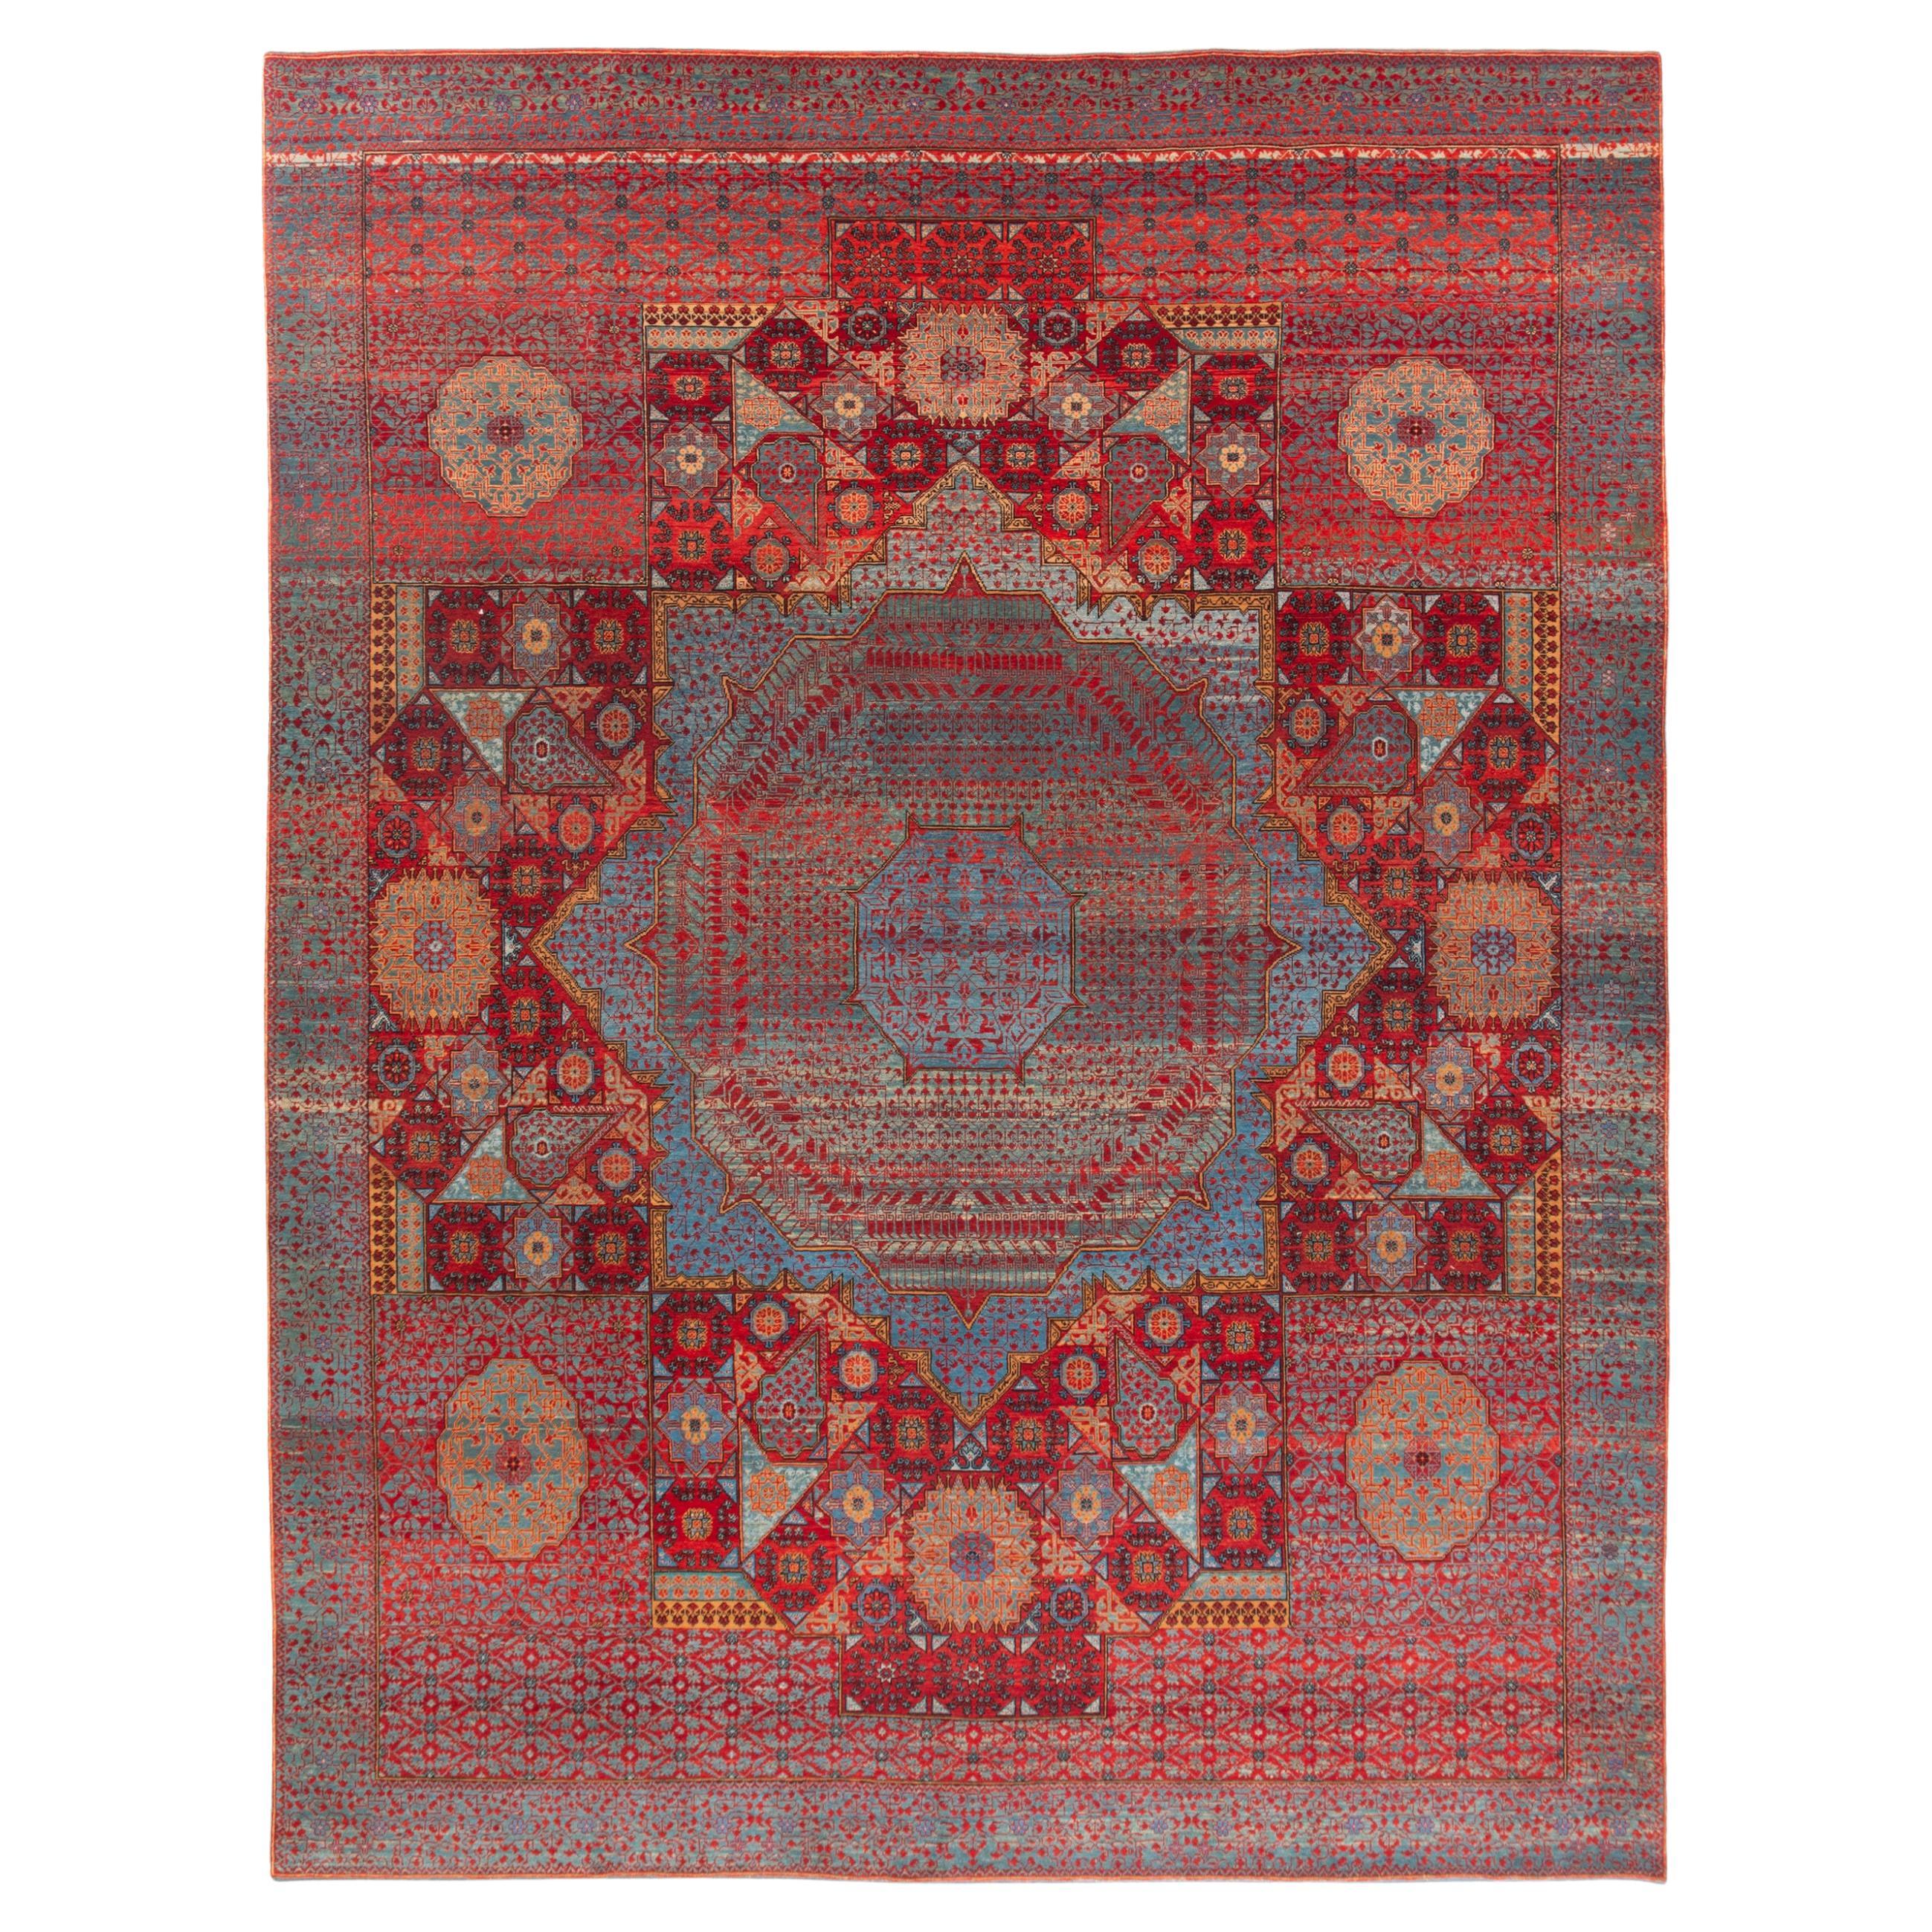 Ararat Rugs Mamluk Carpet with Central Star 16th Century Revival, Natural Dyed For Sale